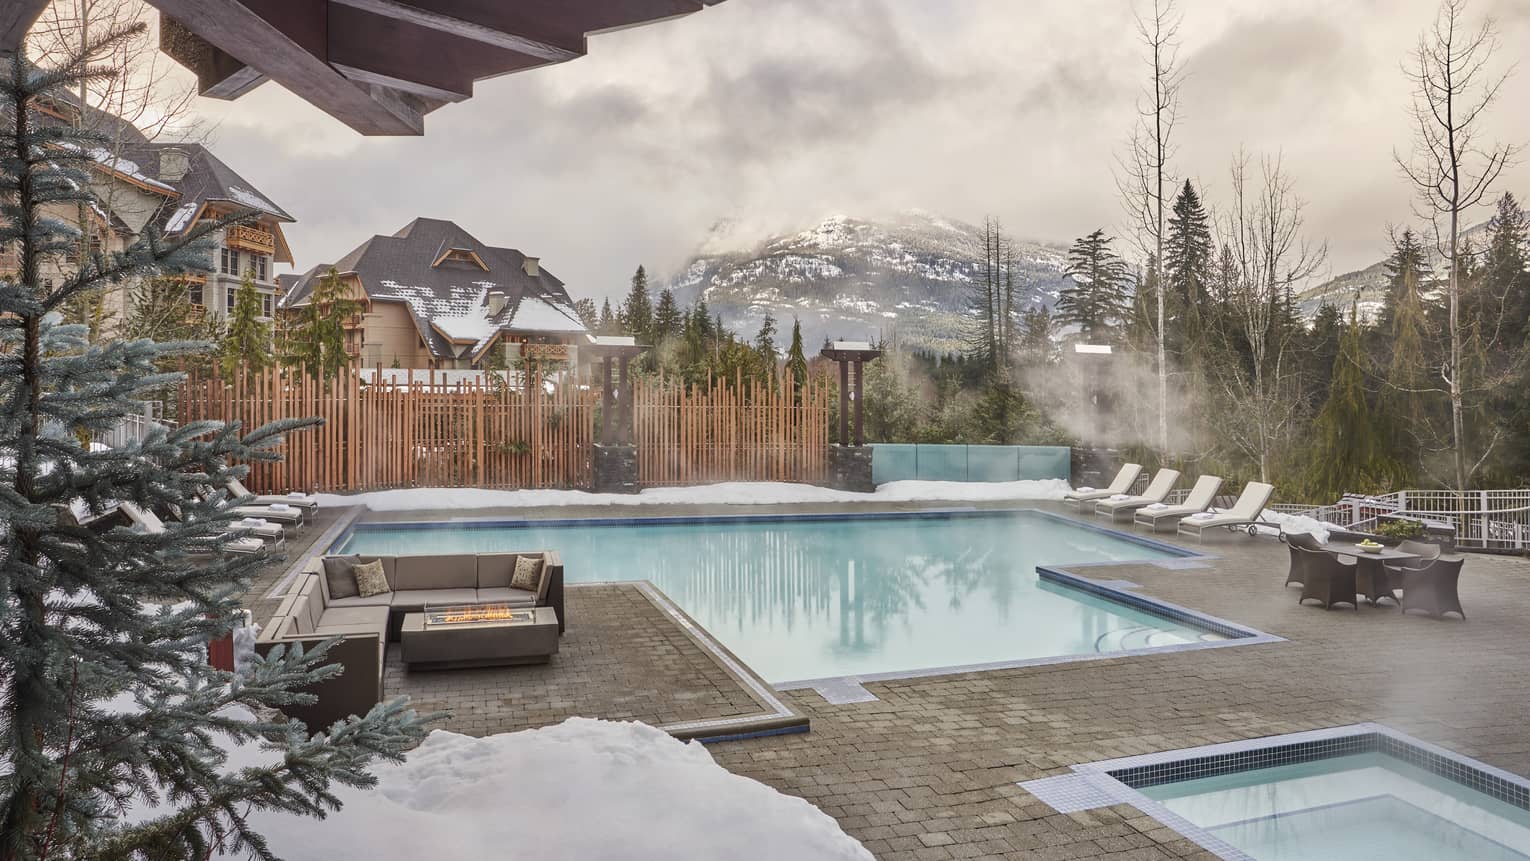 A heated outdoor pool during the winter season.